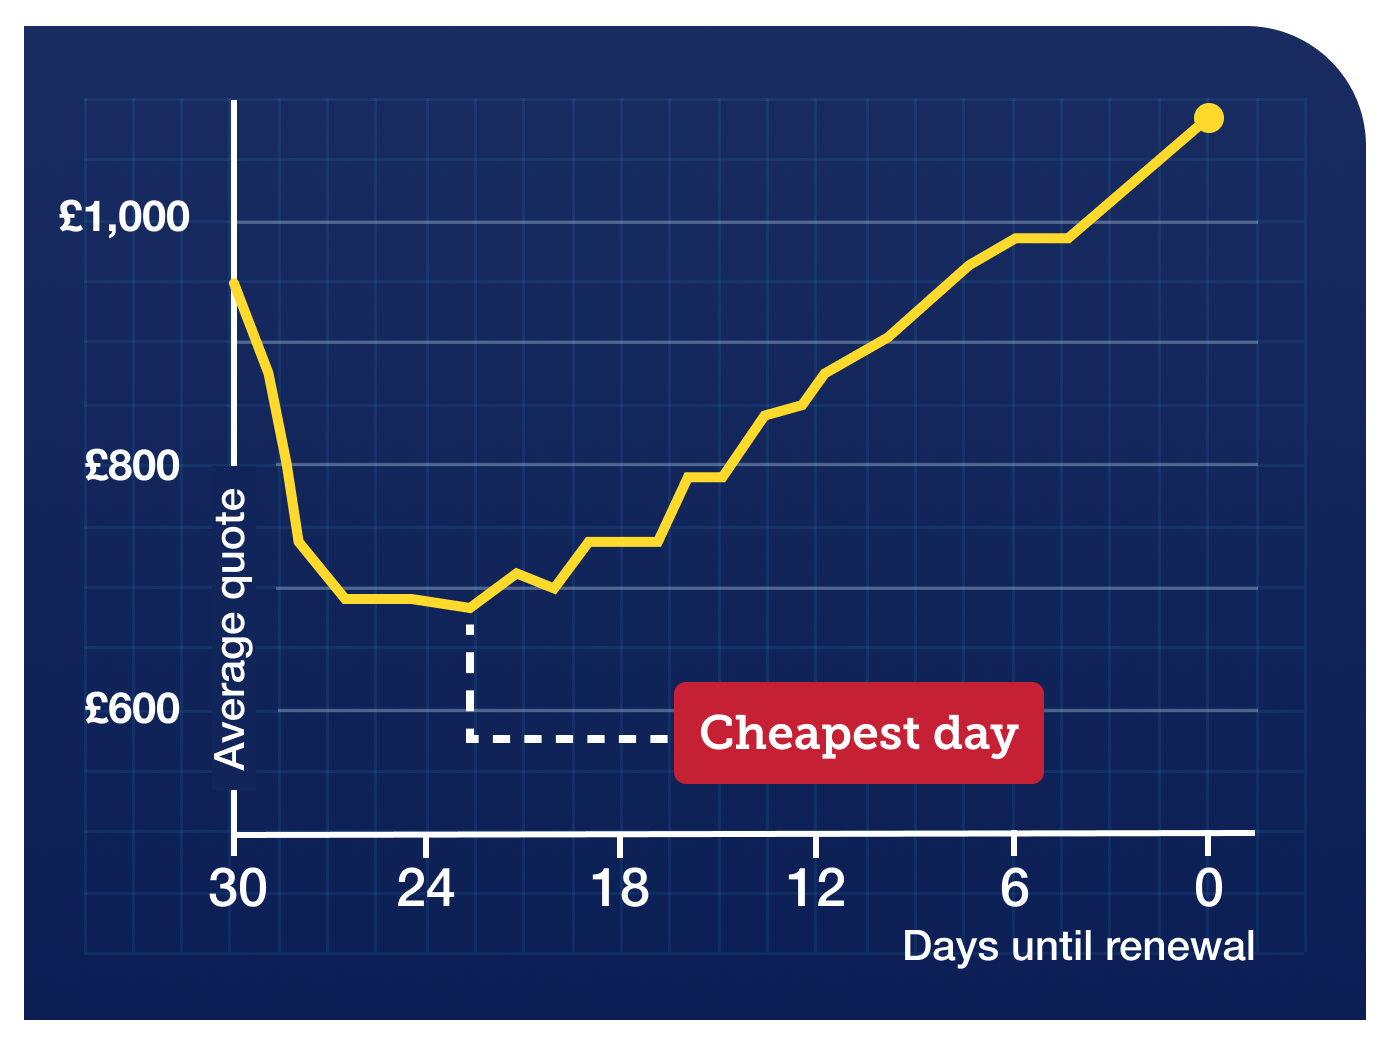 A graph showing how the cost of the average car insurance quote rises the closer you get to your renewal date. It shows that a policy costs an average of £1,198 a year on renewal day. But 23 days earlier (when the cheapest quotes are usually given), the average is just £694 a year, a huge £504 difference. The graph links to full info on this MoneySaving tip in our Cheap car insurance guide.